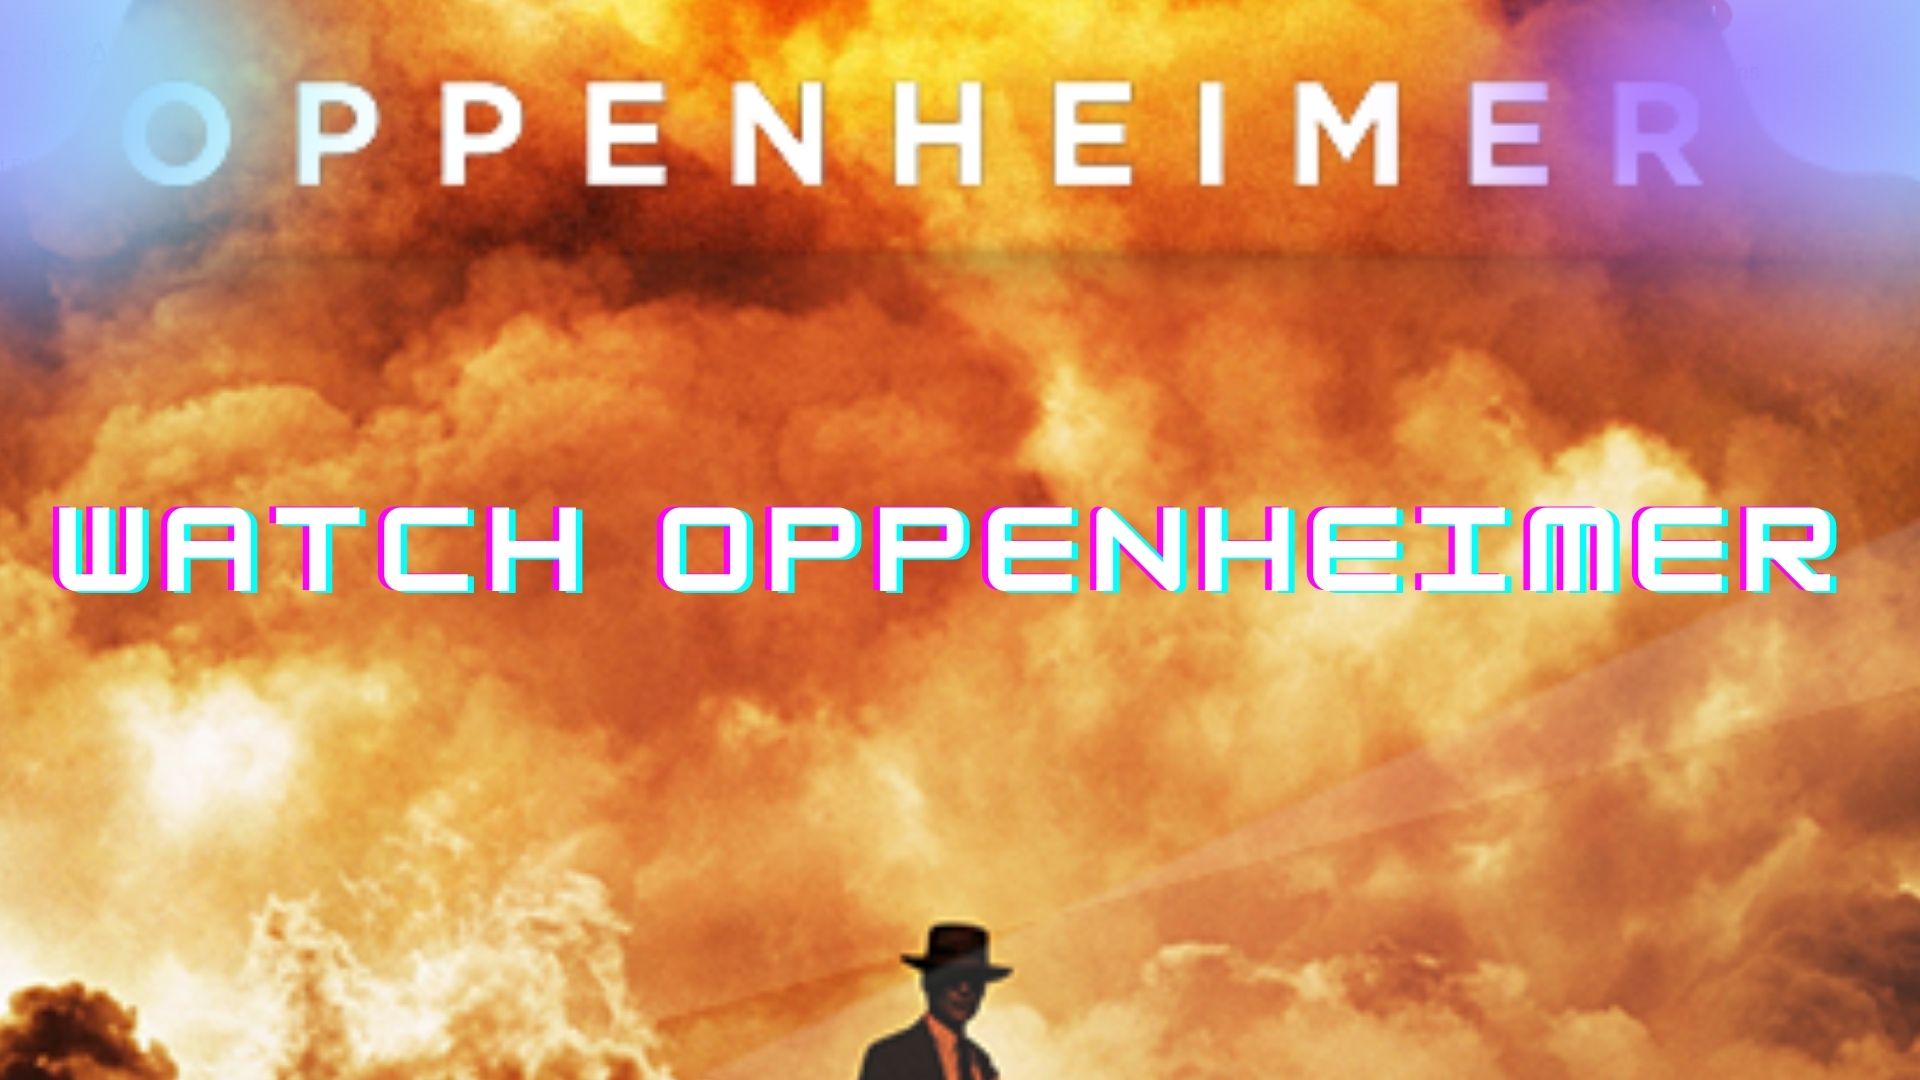 where to watch Oppenheimer, when is oppenheimer streaming, when does oppenheimer come out, what is oppenheimer about, oppenheimer sex scene, oppenheimer showtimes, where can i watch Oppenheimer